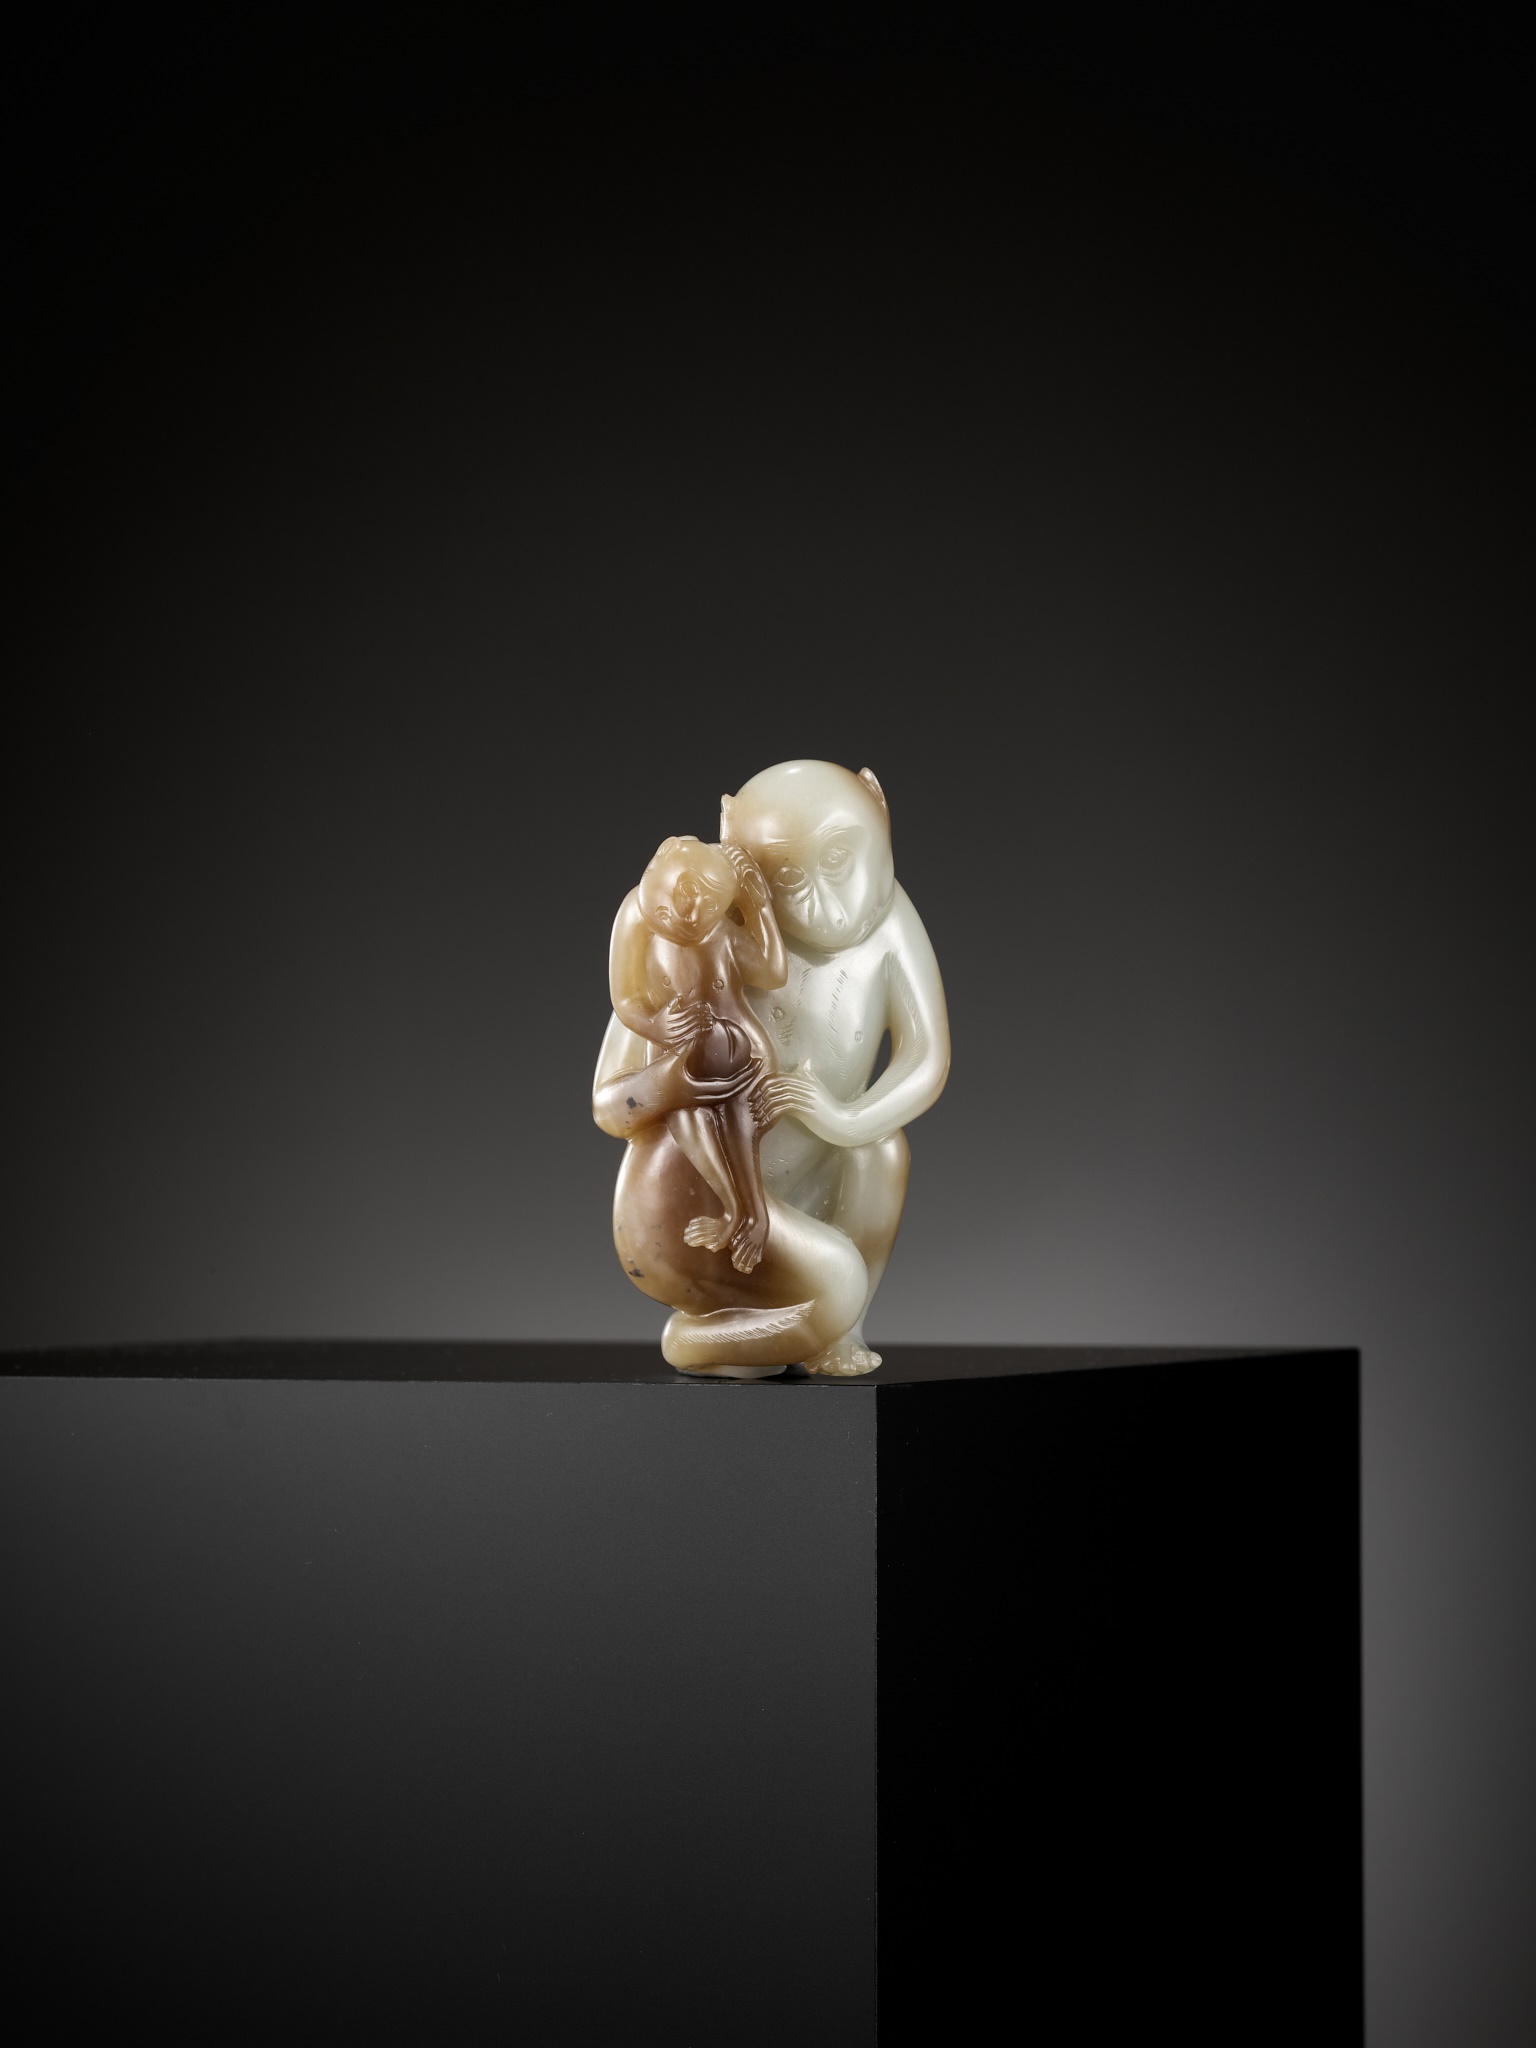 A FINE PALE CELADON AND CHESTNUT BROWN JADE 'MONKEYS AND PEACH' GROUP, 18TH CENTURY - Image 10 of 21